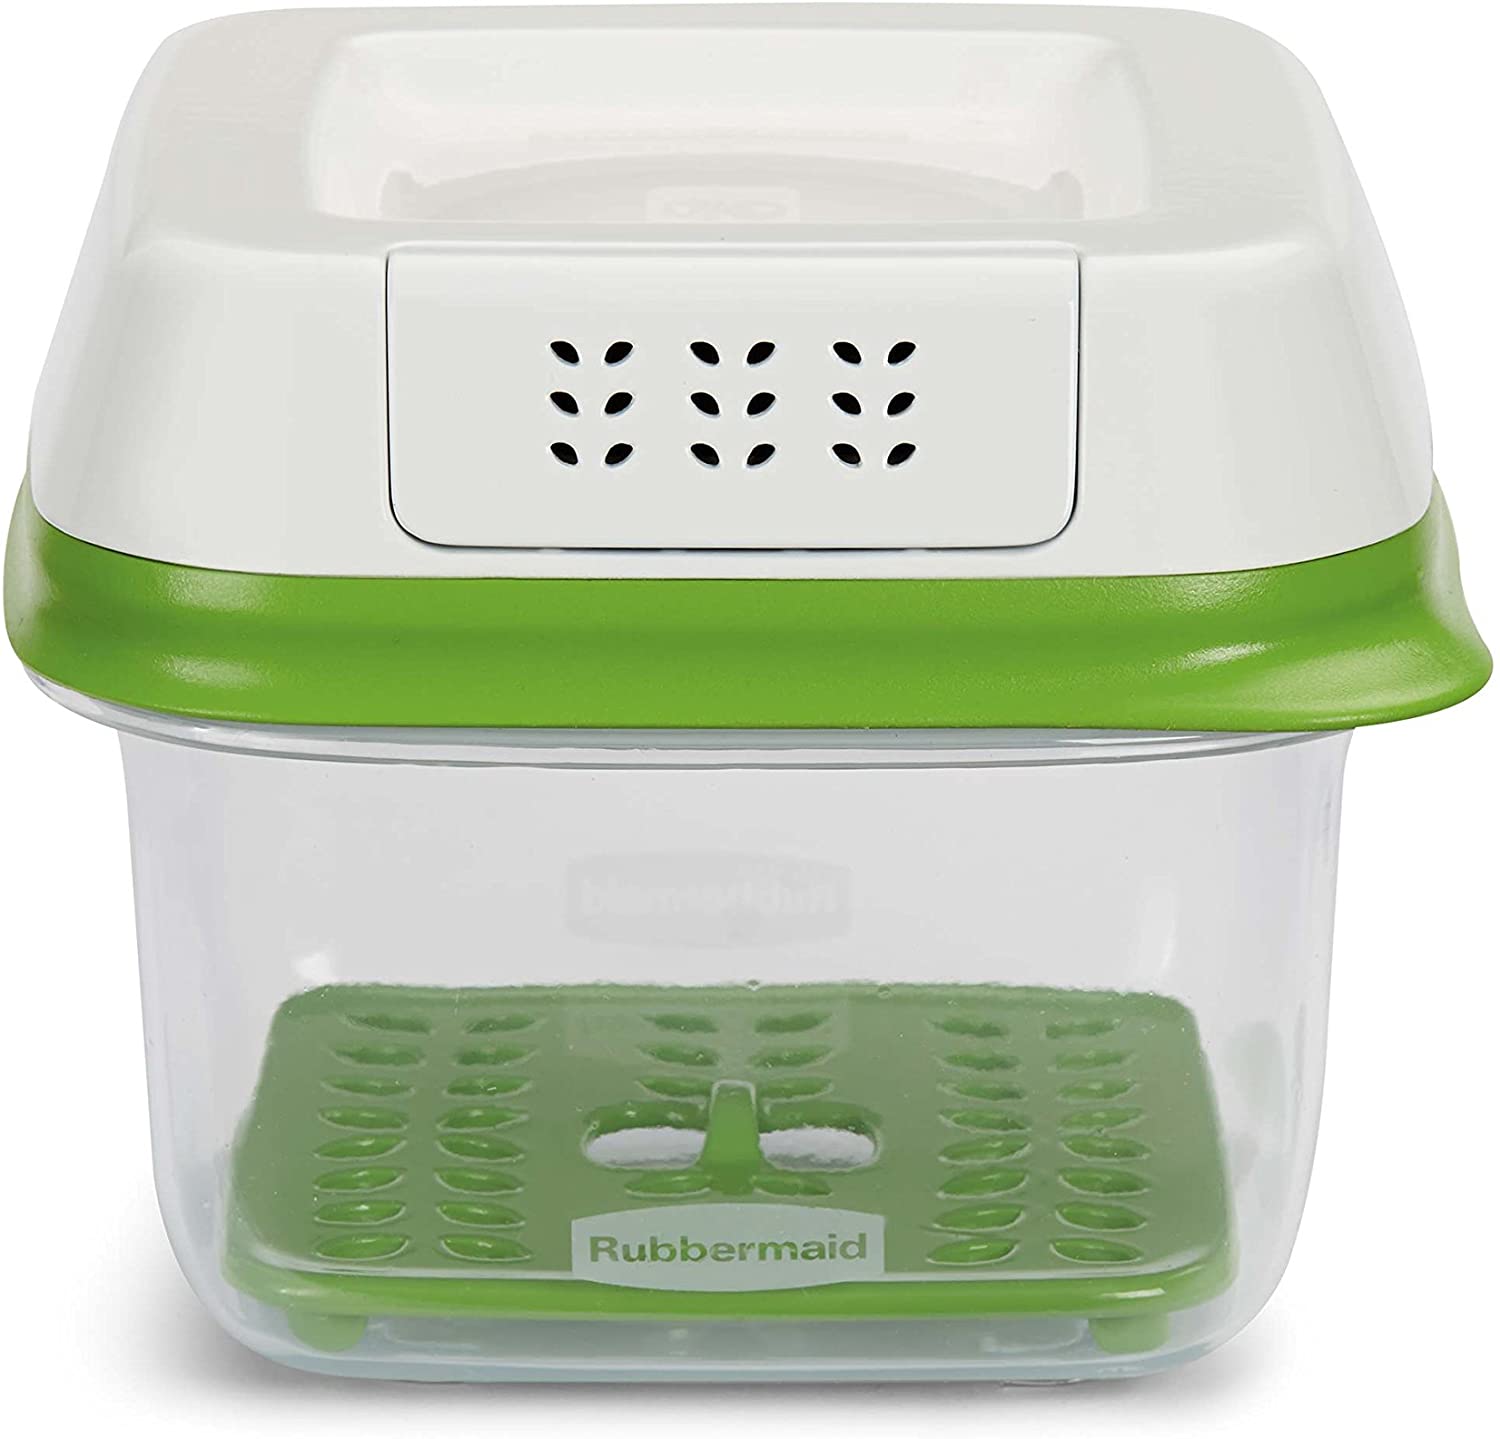 Rubbermaid FreshWorks Small Square Food Storage Container, 591ml
                Rubbermaid FreshWorks Small Square Food Storage Container, 591ml